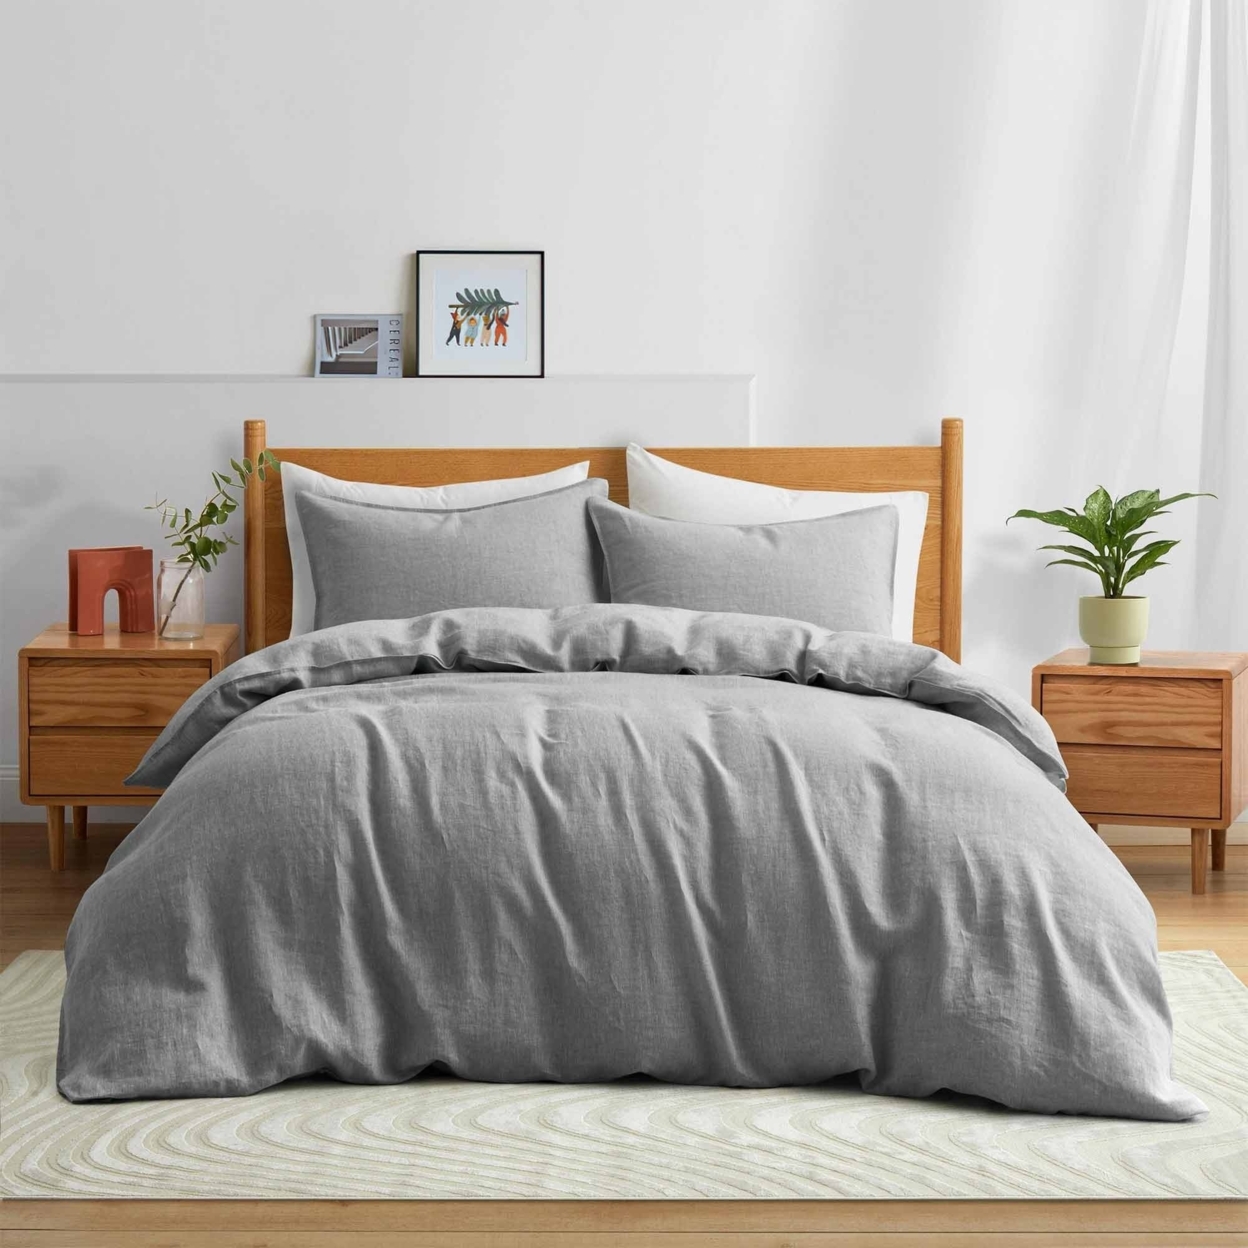 Premium Flax Linen Duvet Cover Set With Pillowcases Moisture Wicking And Breathable - Light Grey, Twin